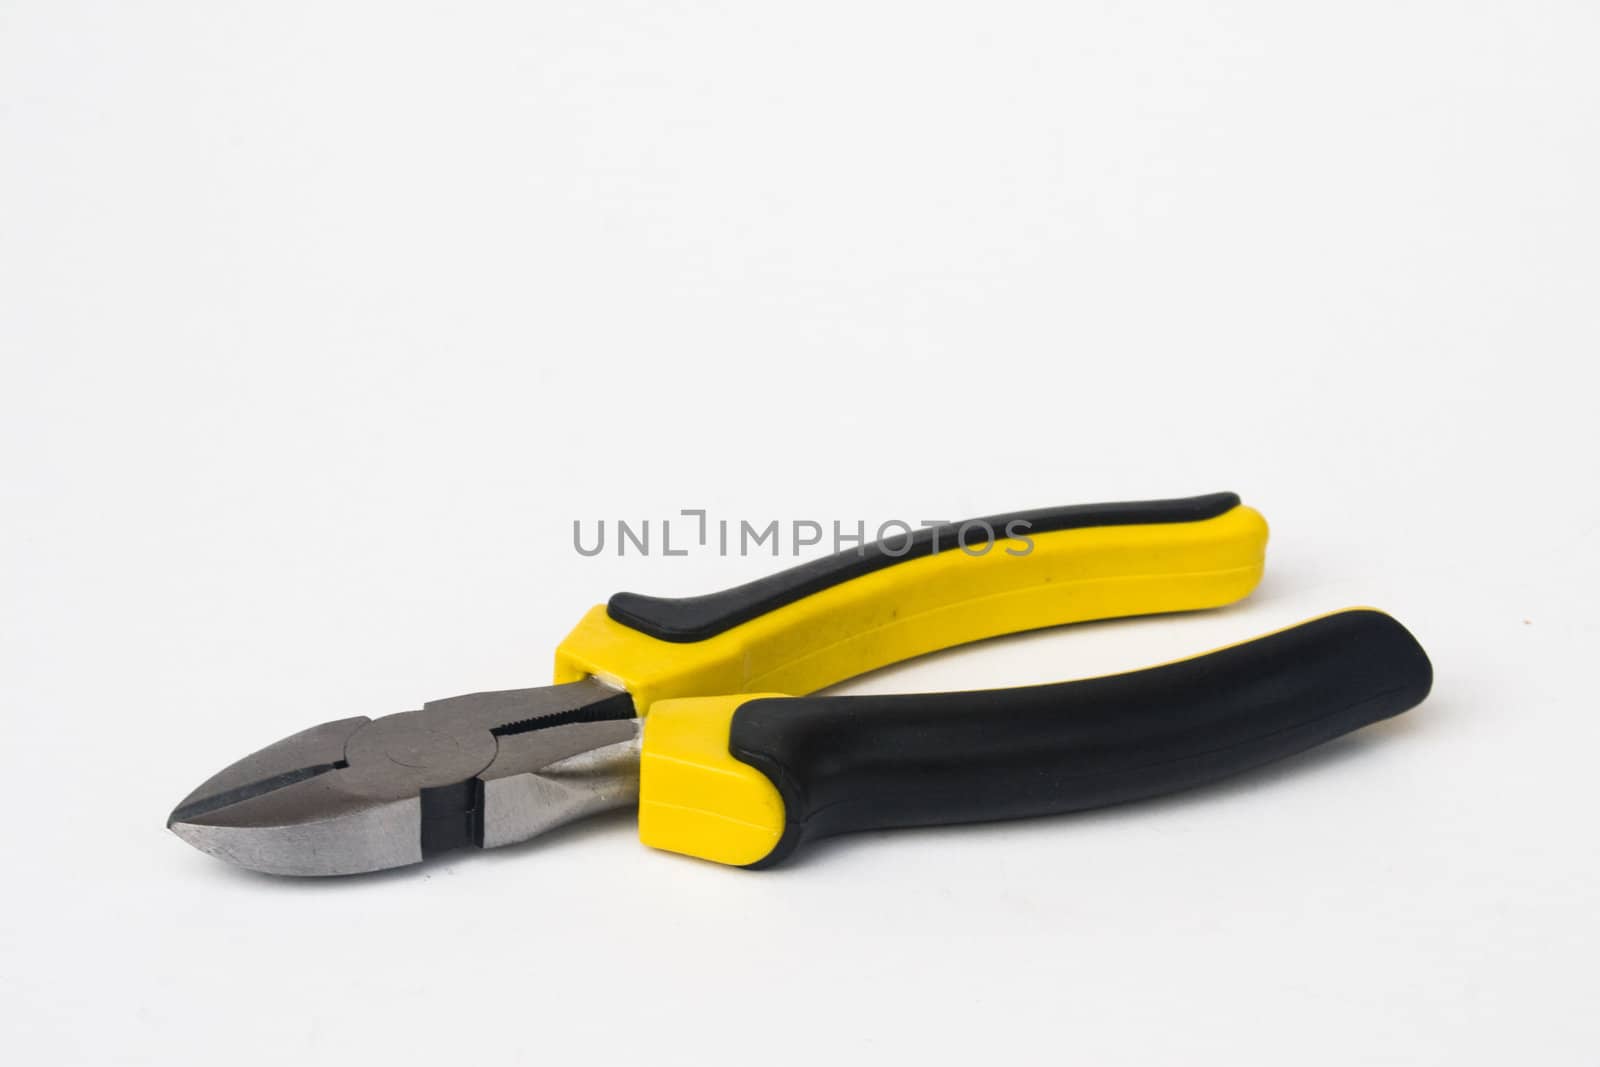 Wire cutter with yellow and black handle against white background